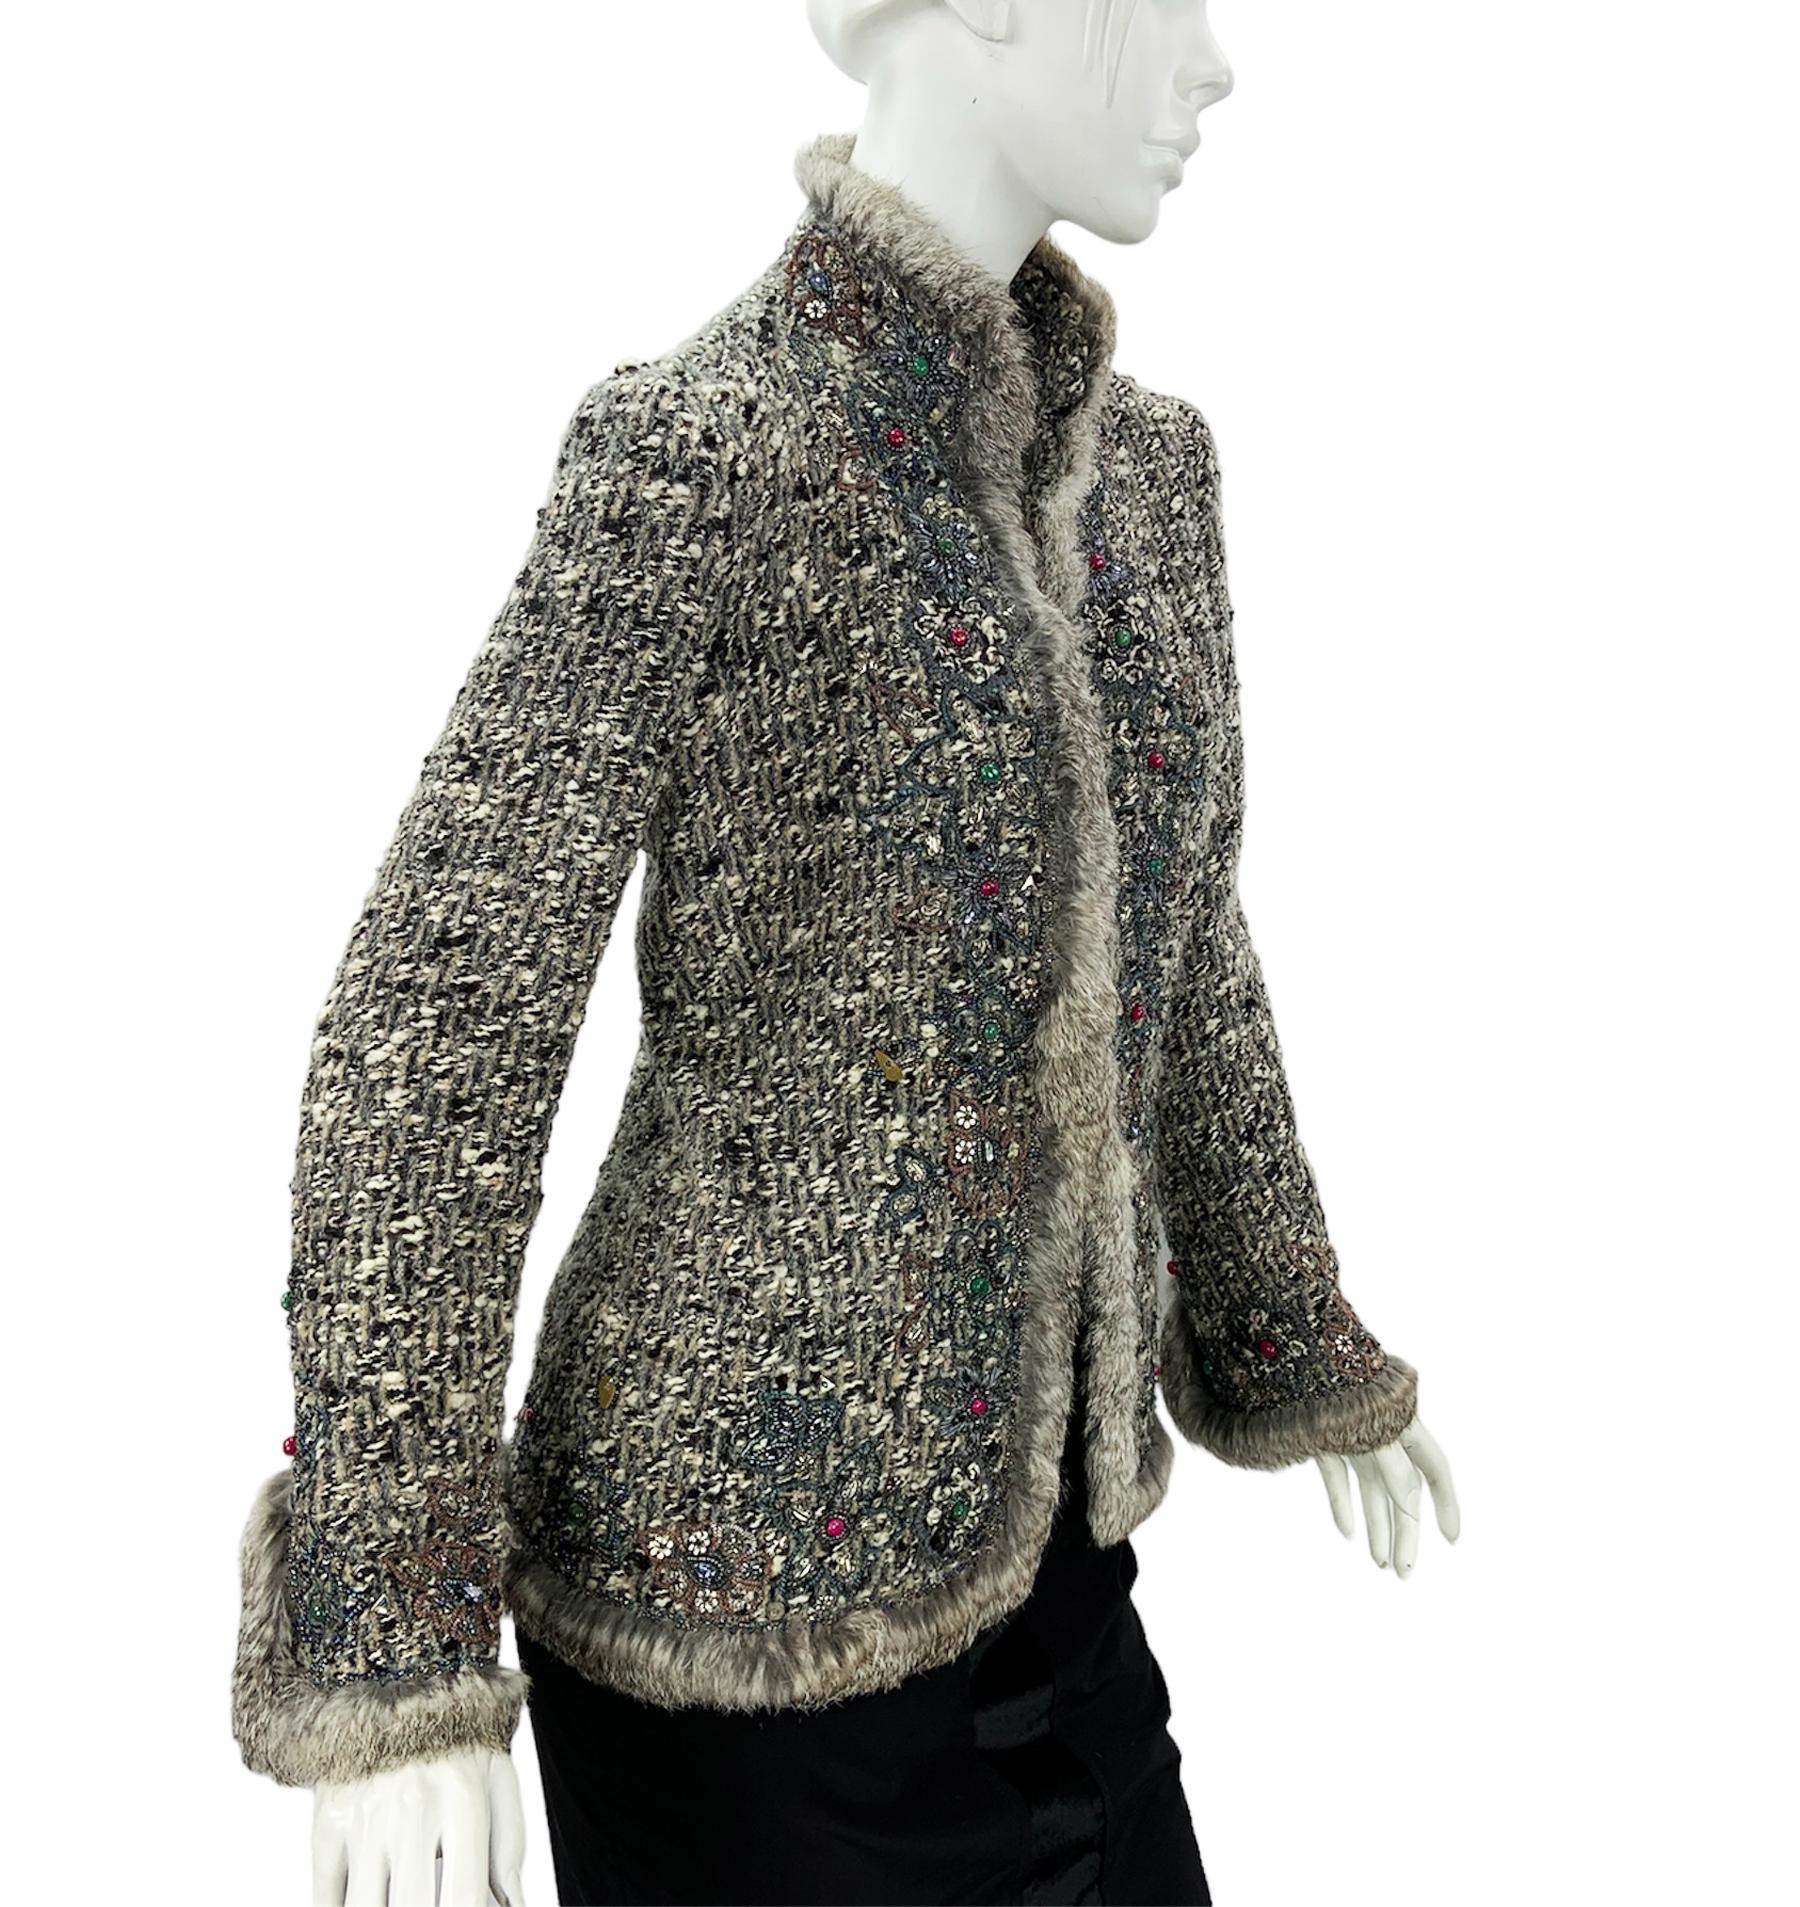 Rare, Museum Quality Oscar de la Renta Boucle Jacket Cardigan
Designer size 10
F/W 2004 Collection
Rich Embellished and Embroidered, Rabbit Fur Trim, Hook and Eye Closure, Partly Lined.
85% Wool, 10% Mohair, 5% Polyamide.
Measurements: Length - 26